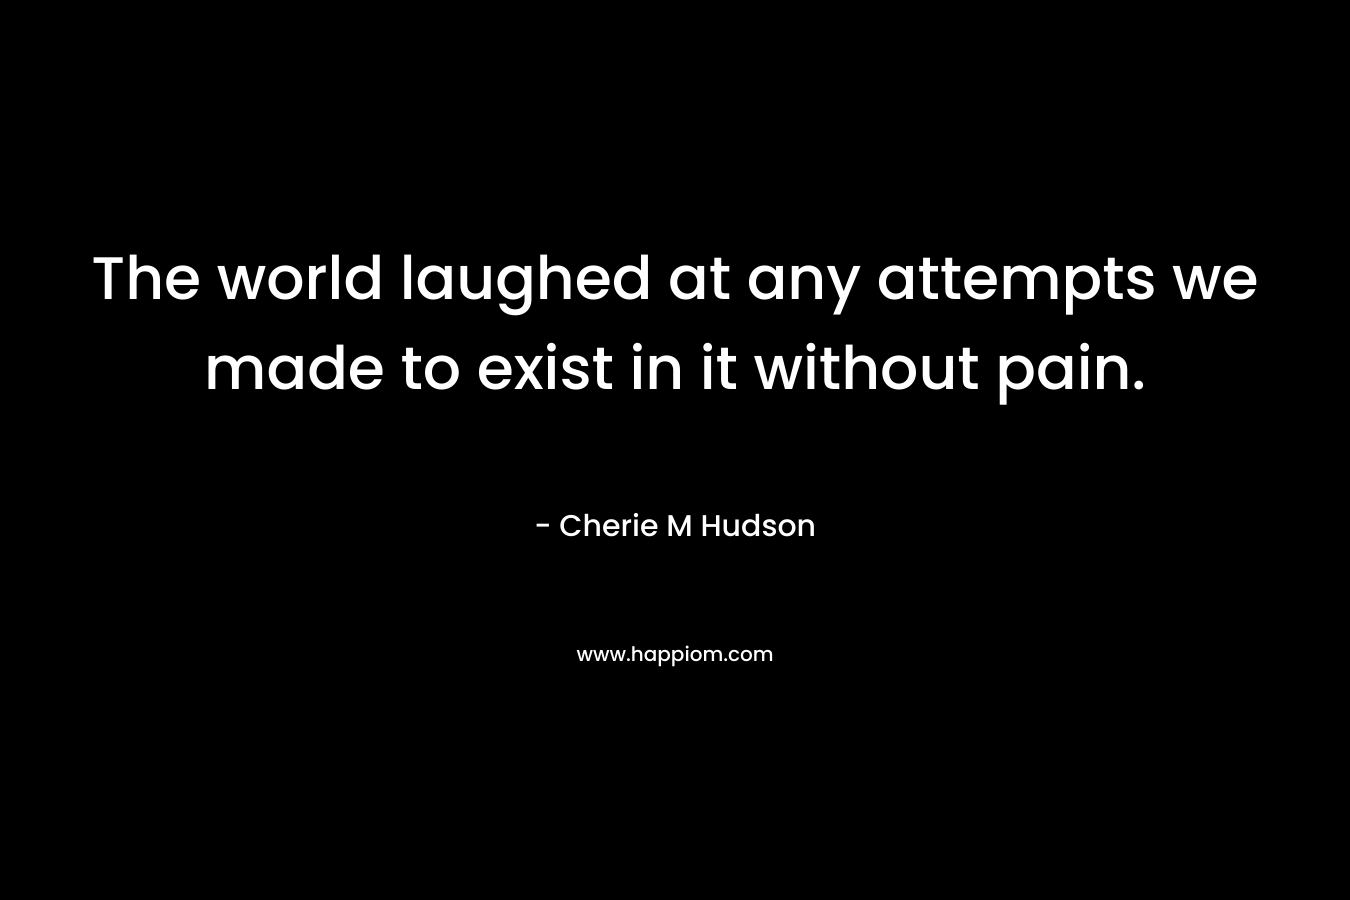 The world laughed at any attempts we made to exist in it without pain.